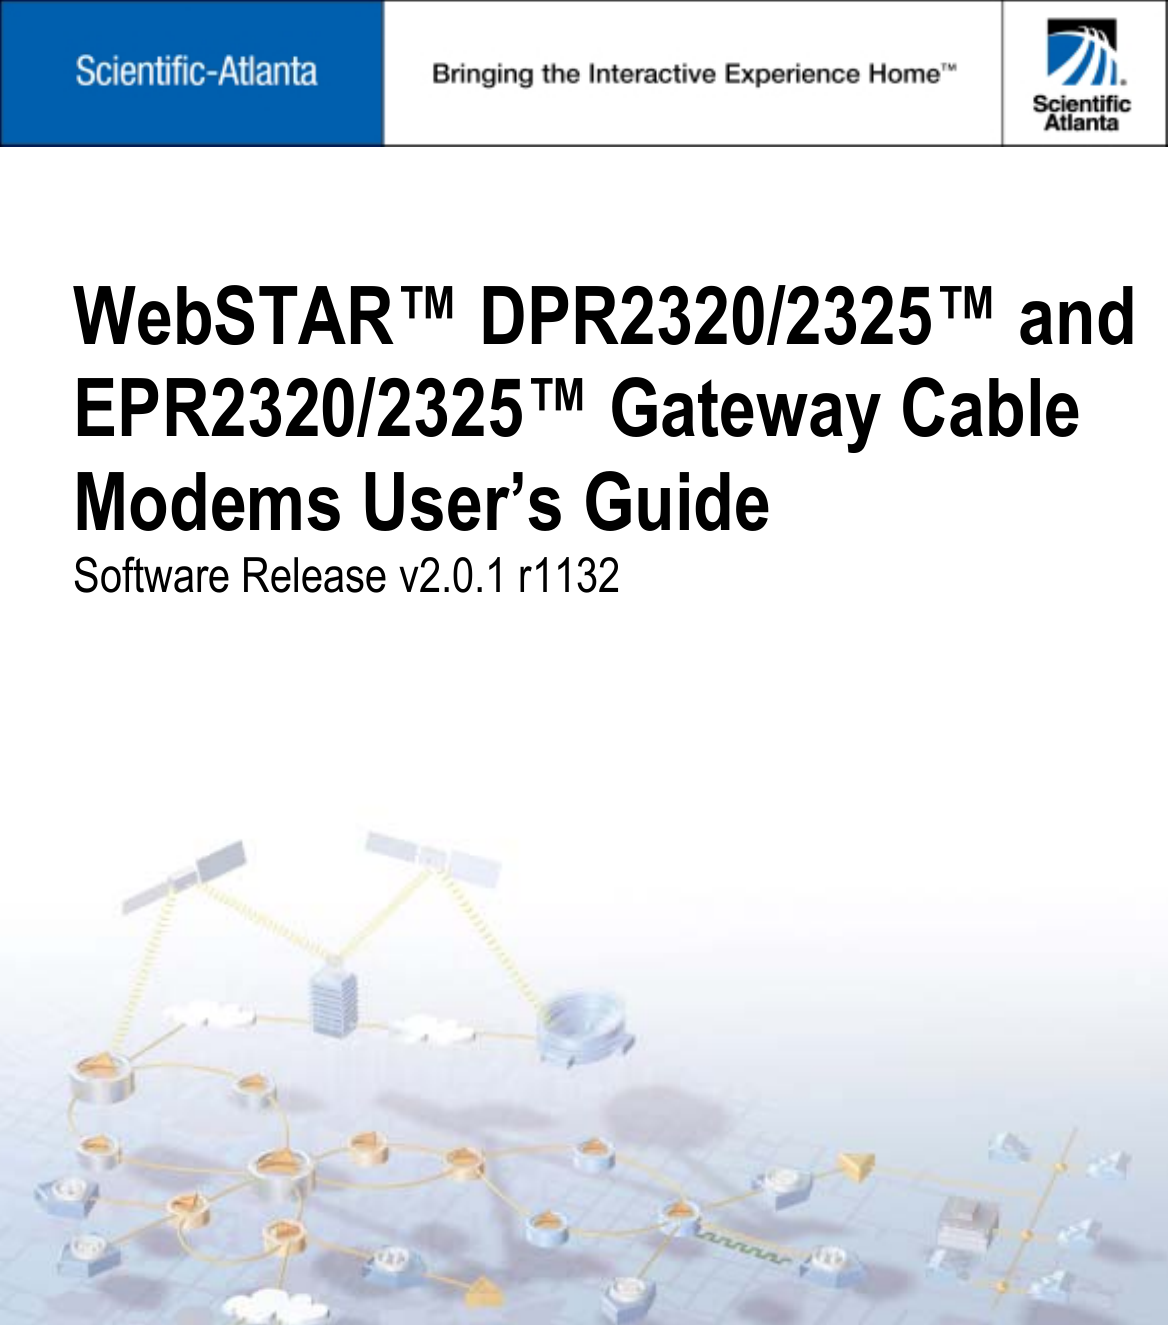 WebSTAR™ DPR2320/2325™ and EPR2320/2325™ Gateway Cable Modems User’s Guide Software Release v2.0.1 r1132 